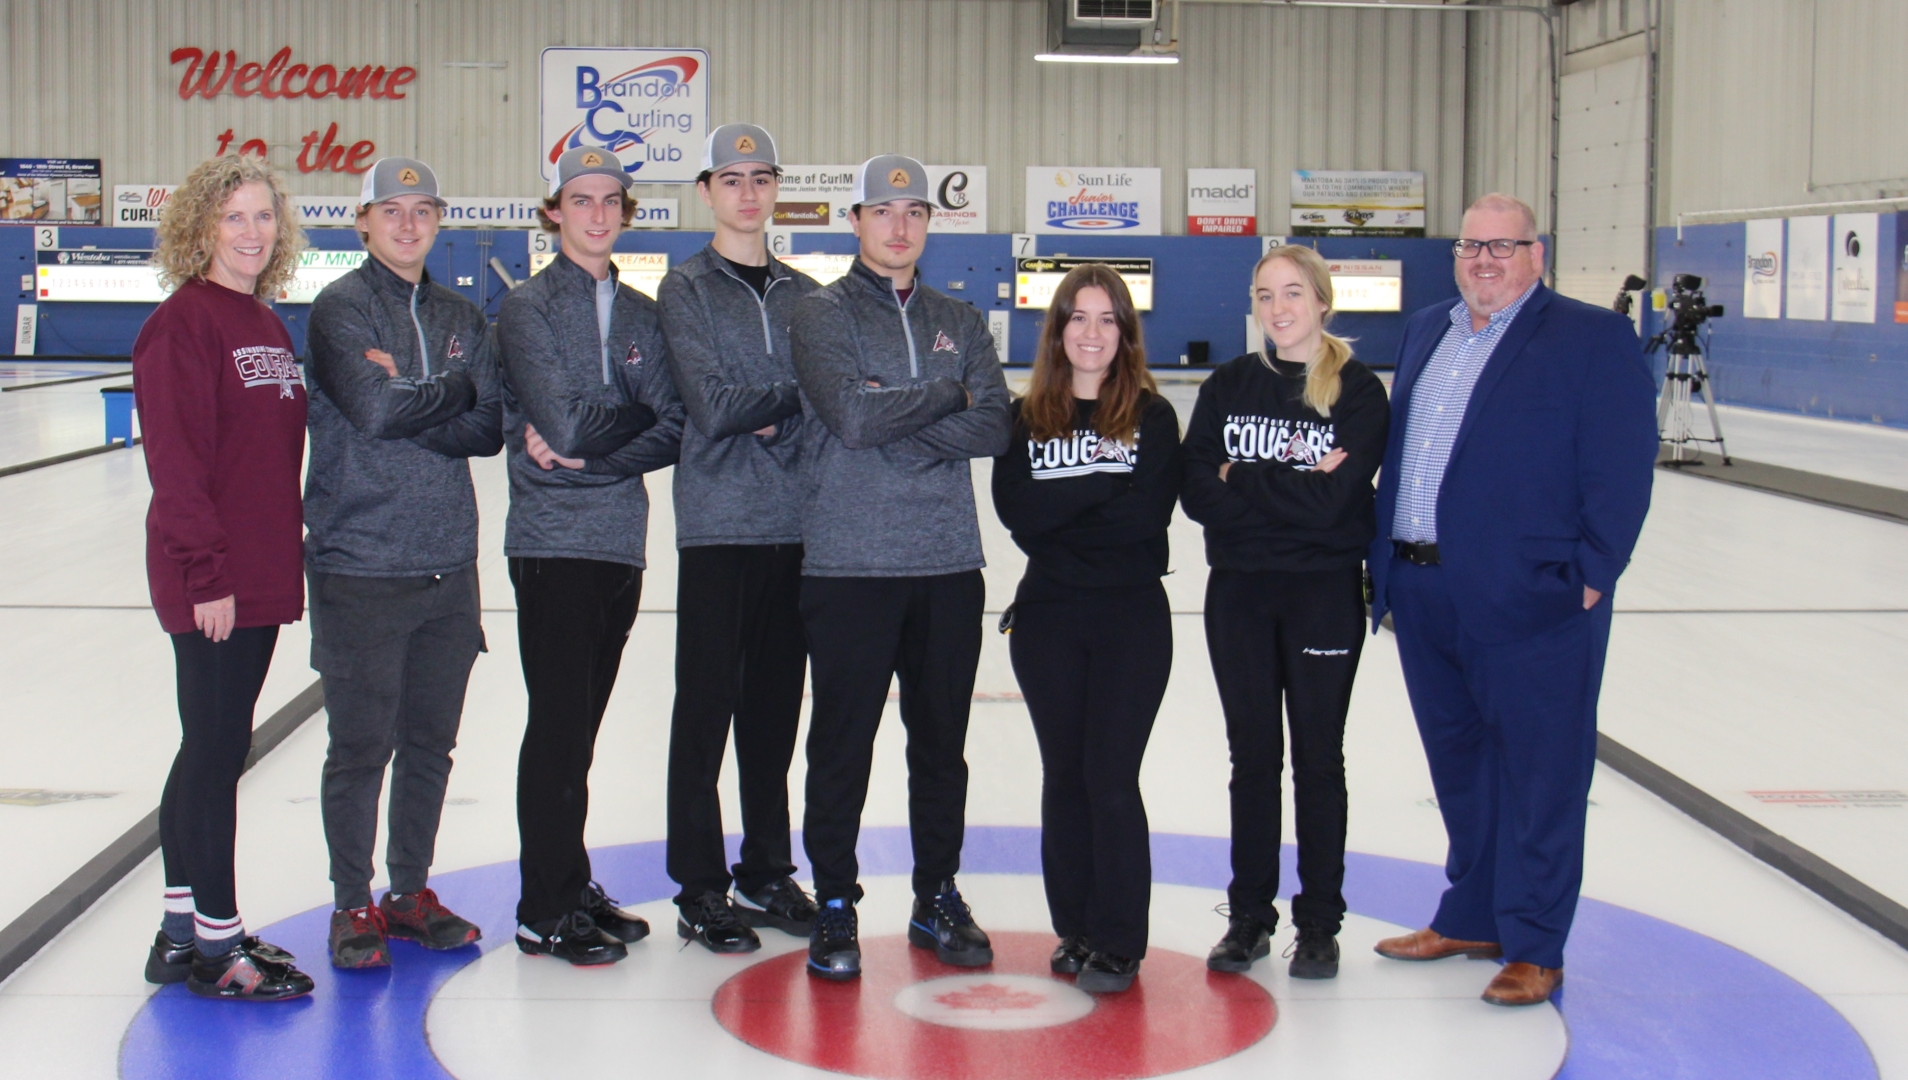 Members of the Women's and Men's Cougars Curling teams with coach Maureen Bonar and Assiniboine president Mark Frison